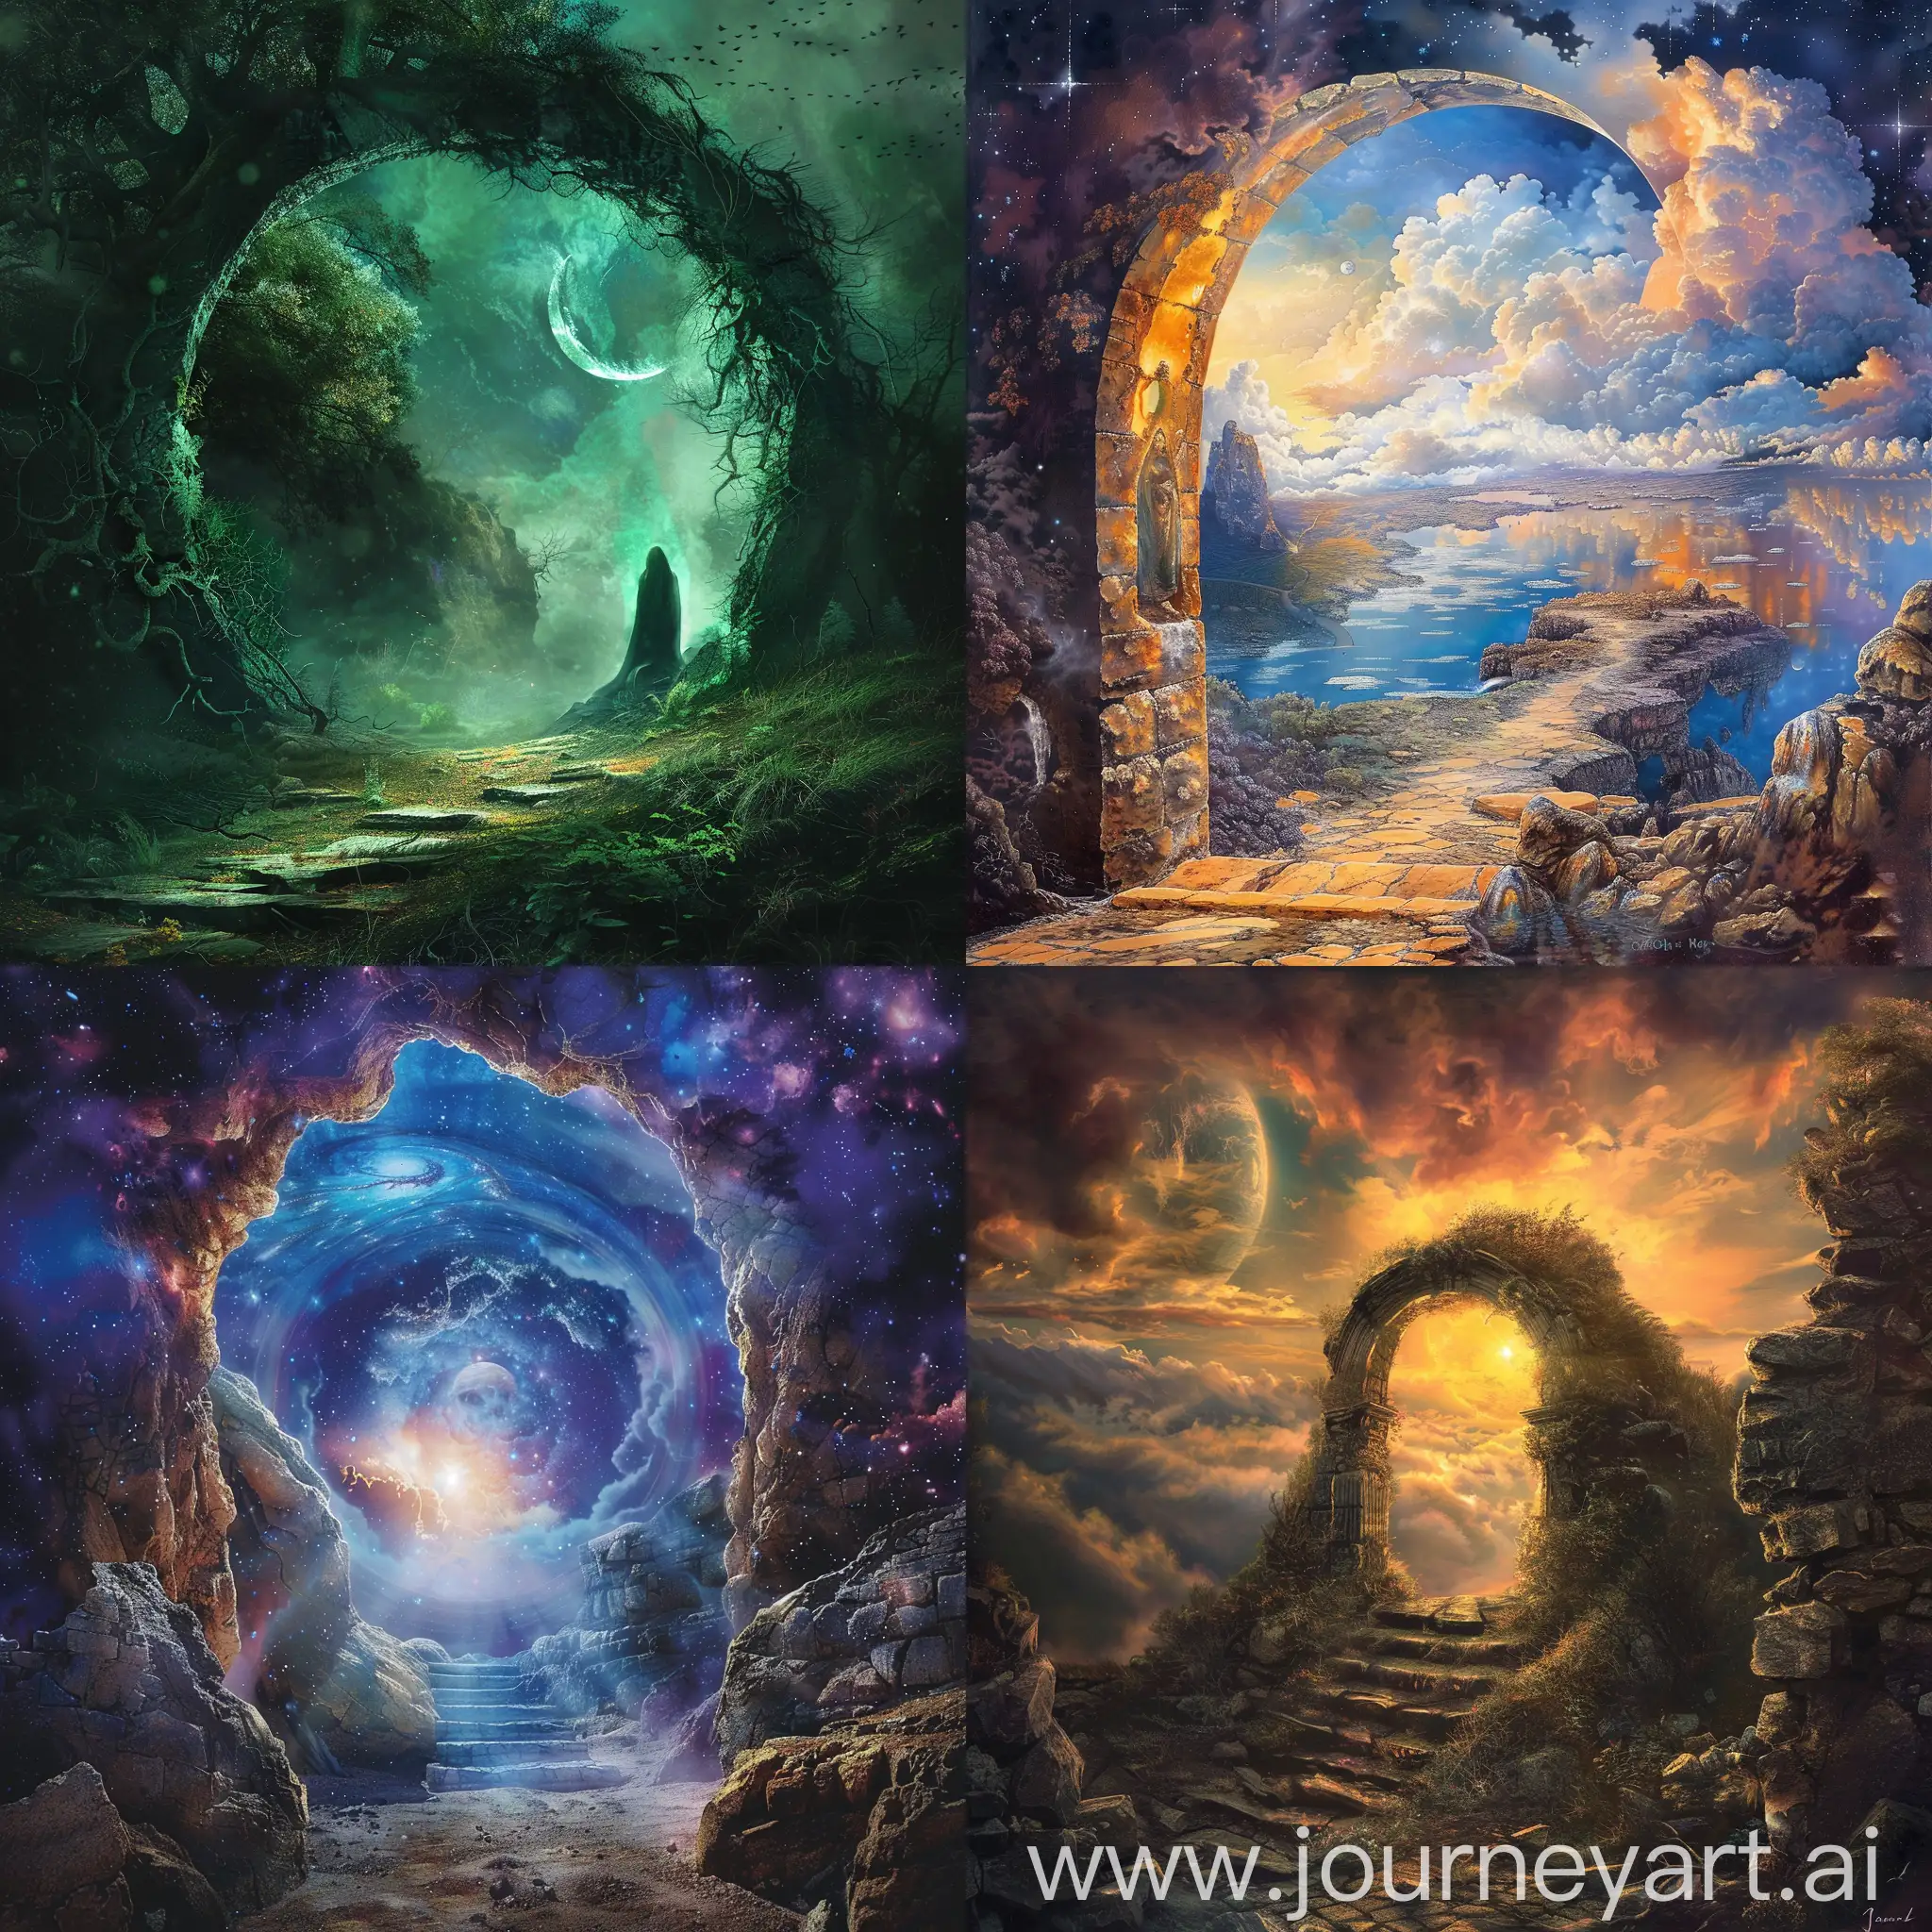 Mystical-Portal-to-Another-World-Fantasy-Art